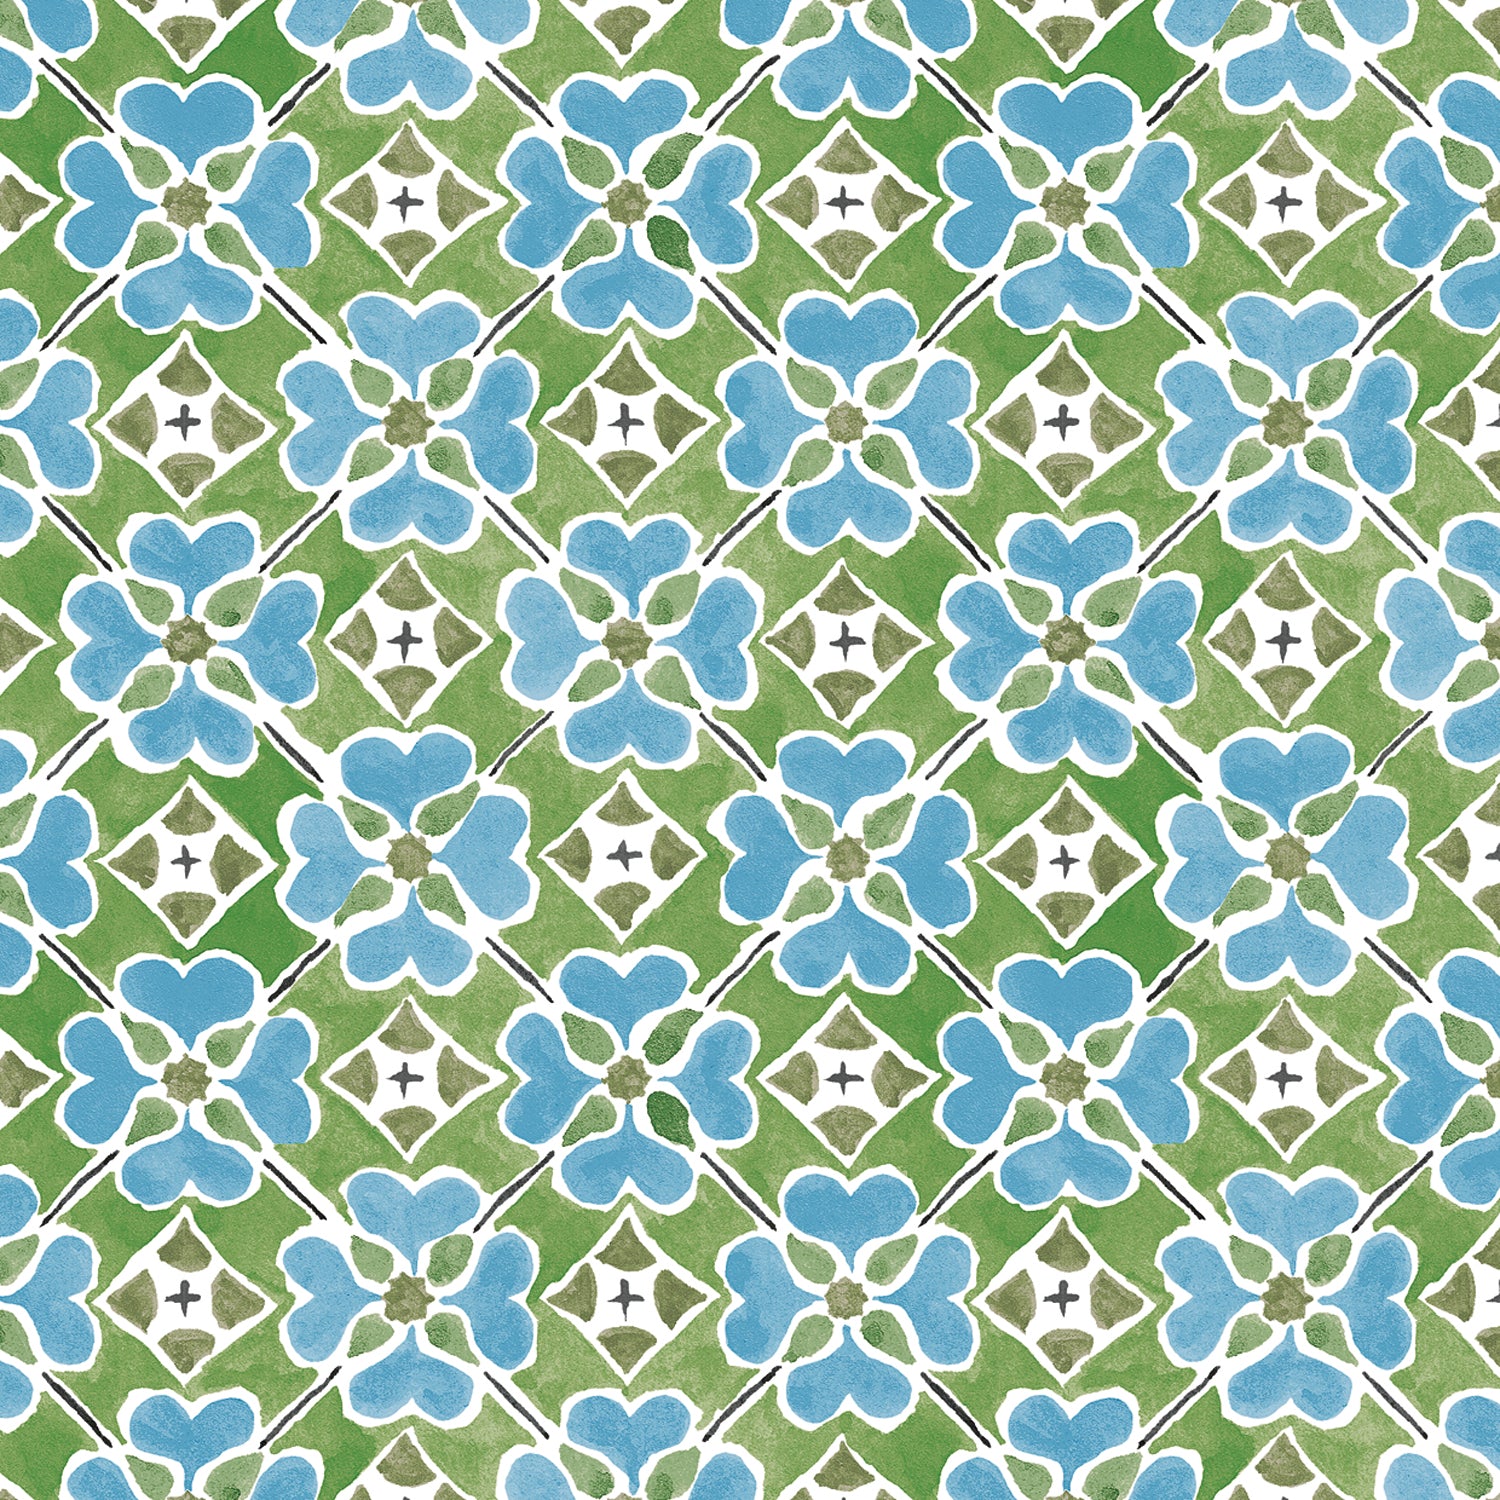 Detail of wallpaper in a floral lattice print in blue, green, brown and white.